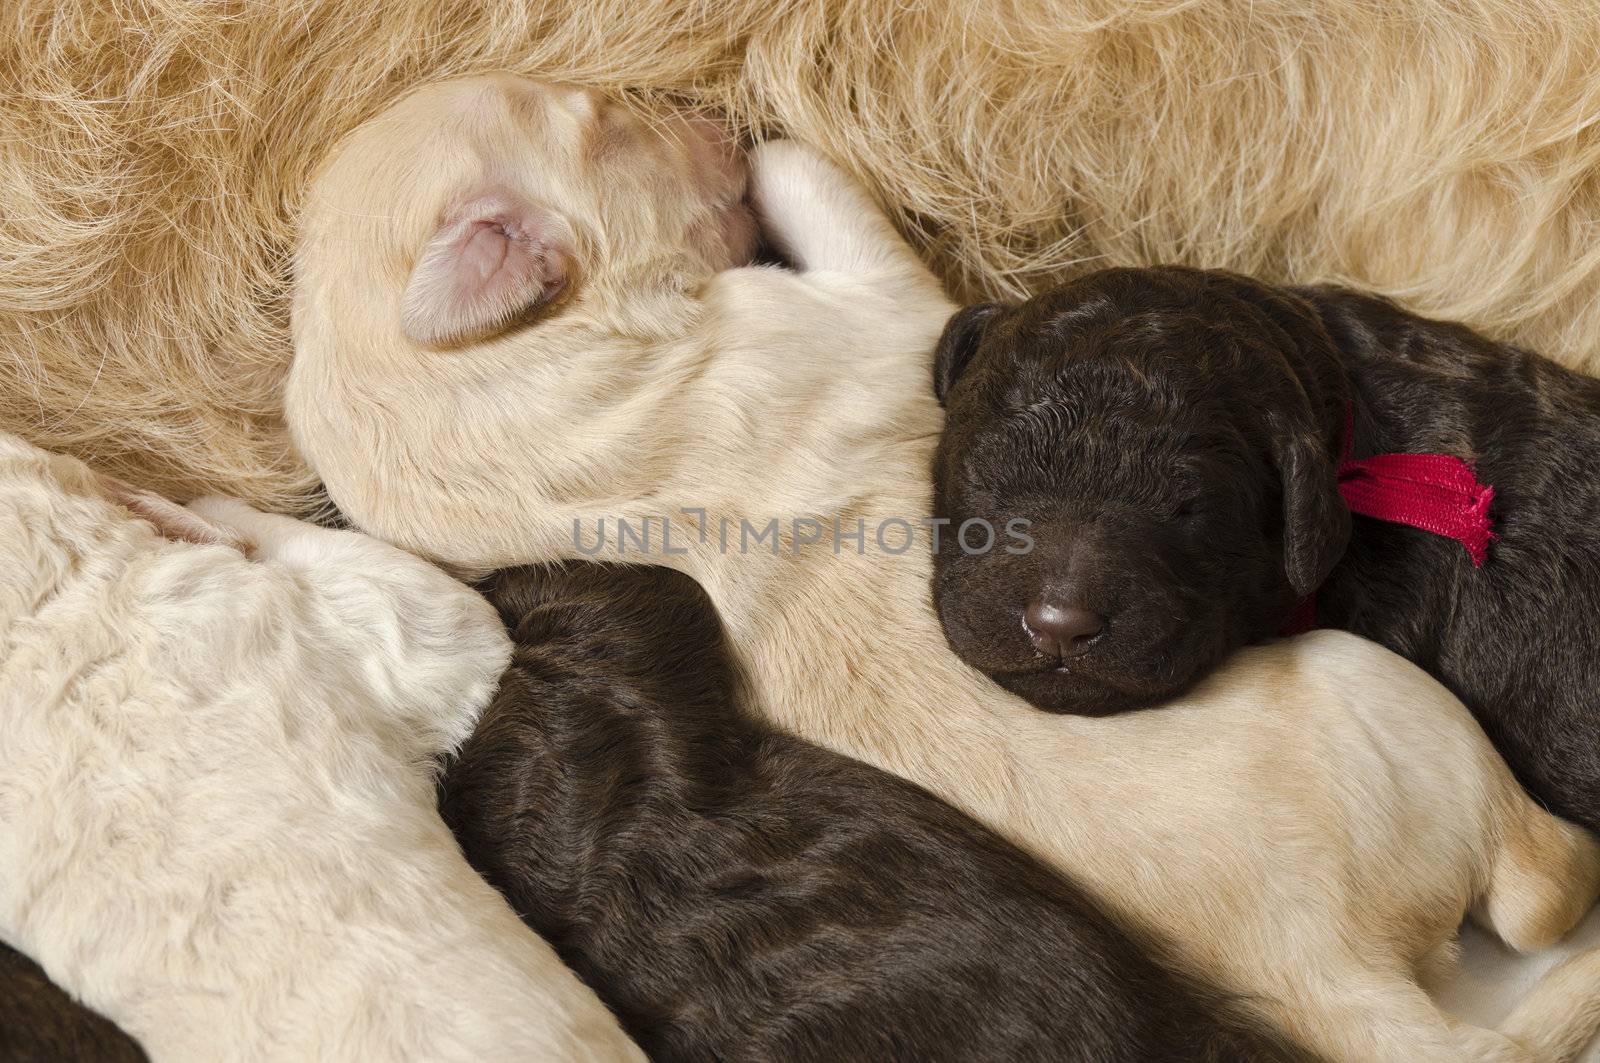 Selective focus on two of the puppies next to their mom